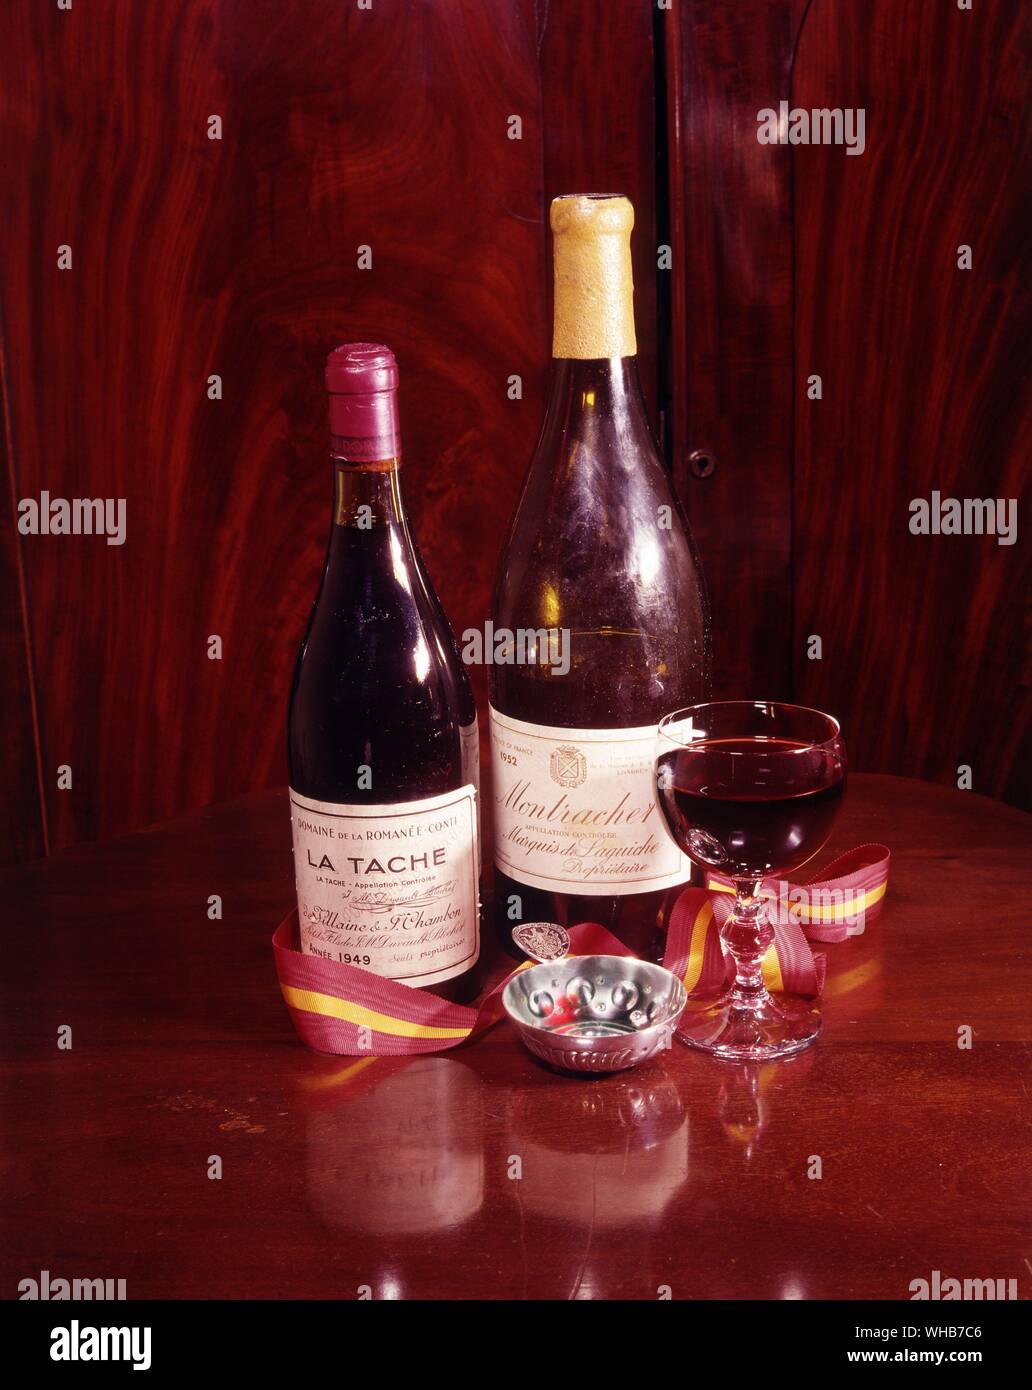 Wine bottles and glass. Stock Photo